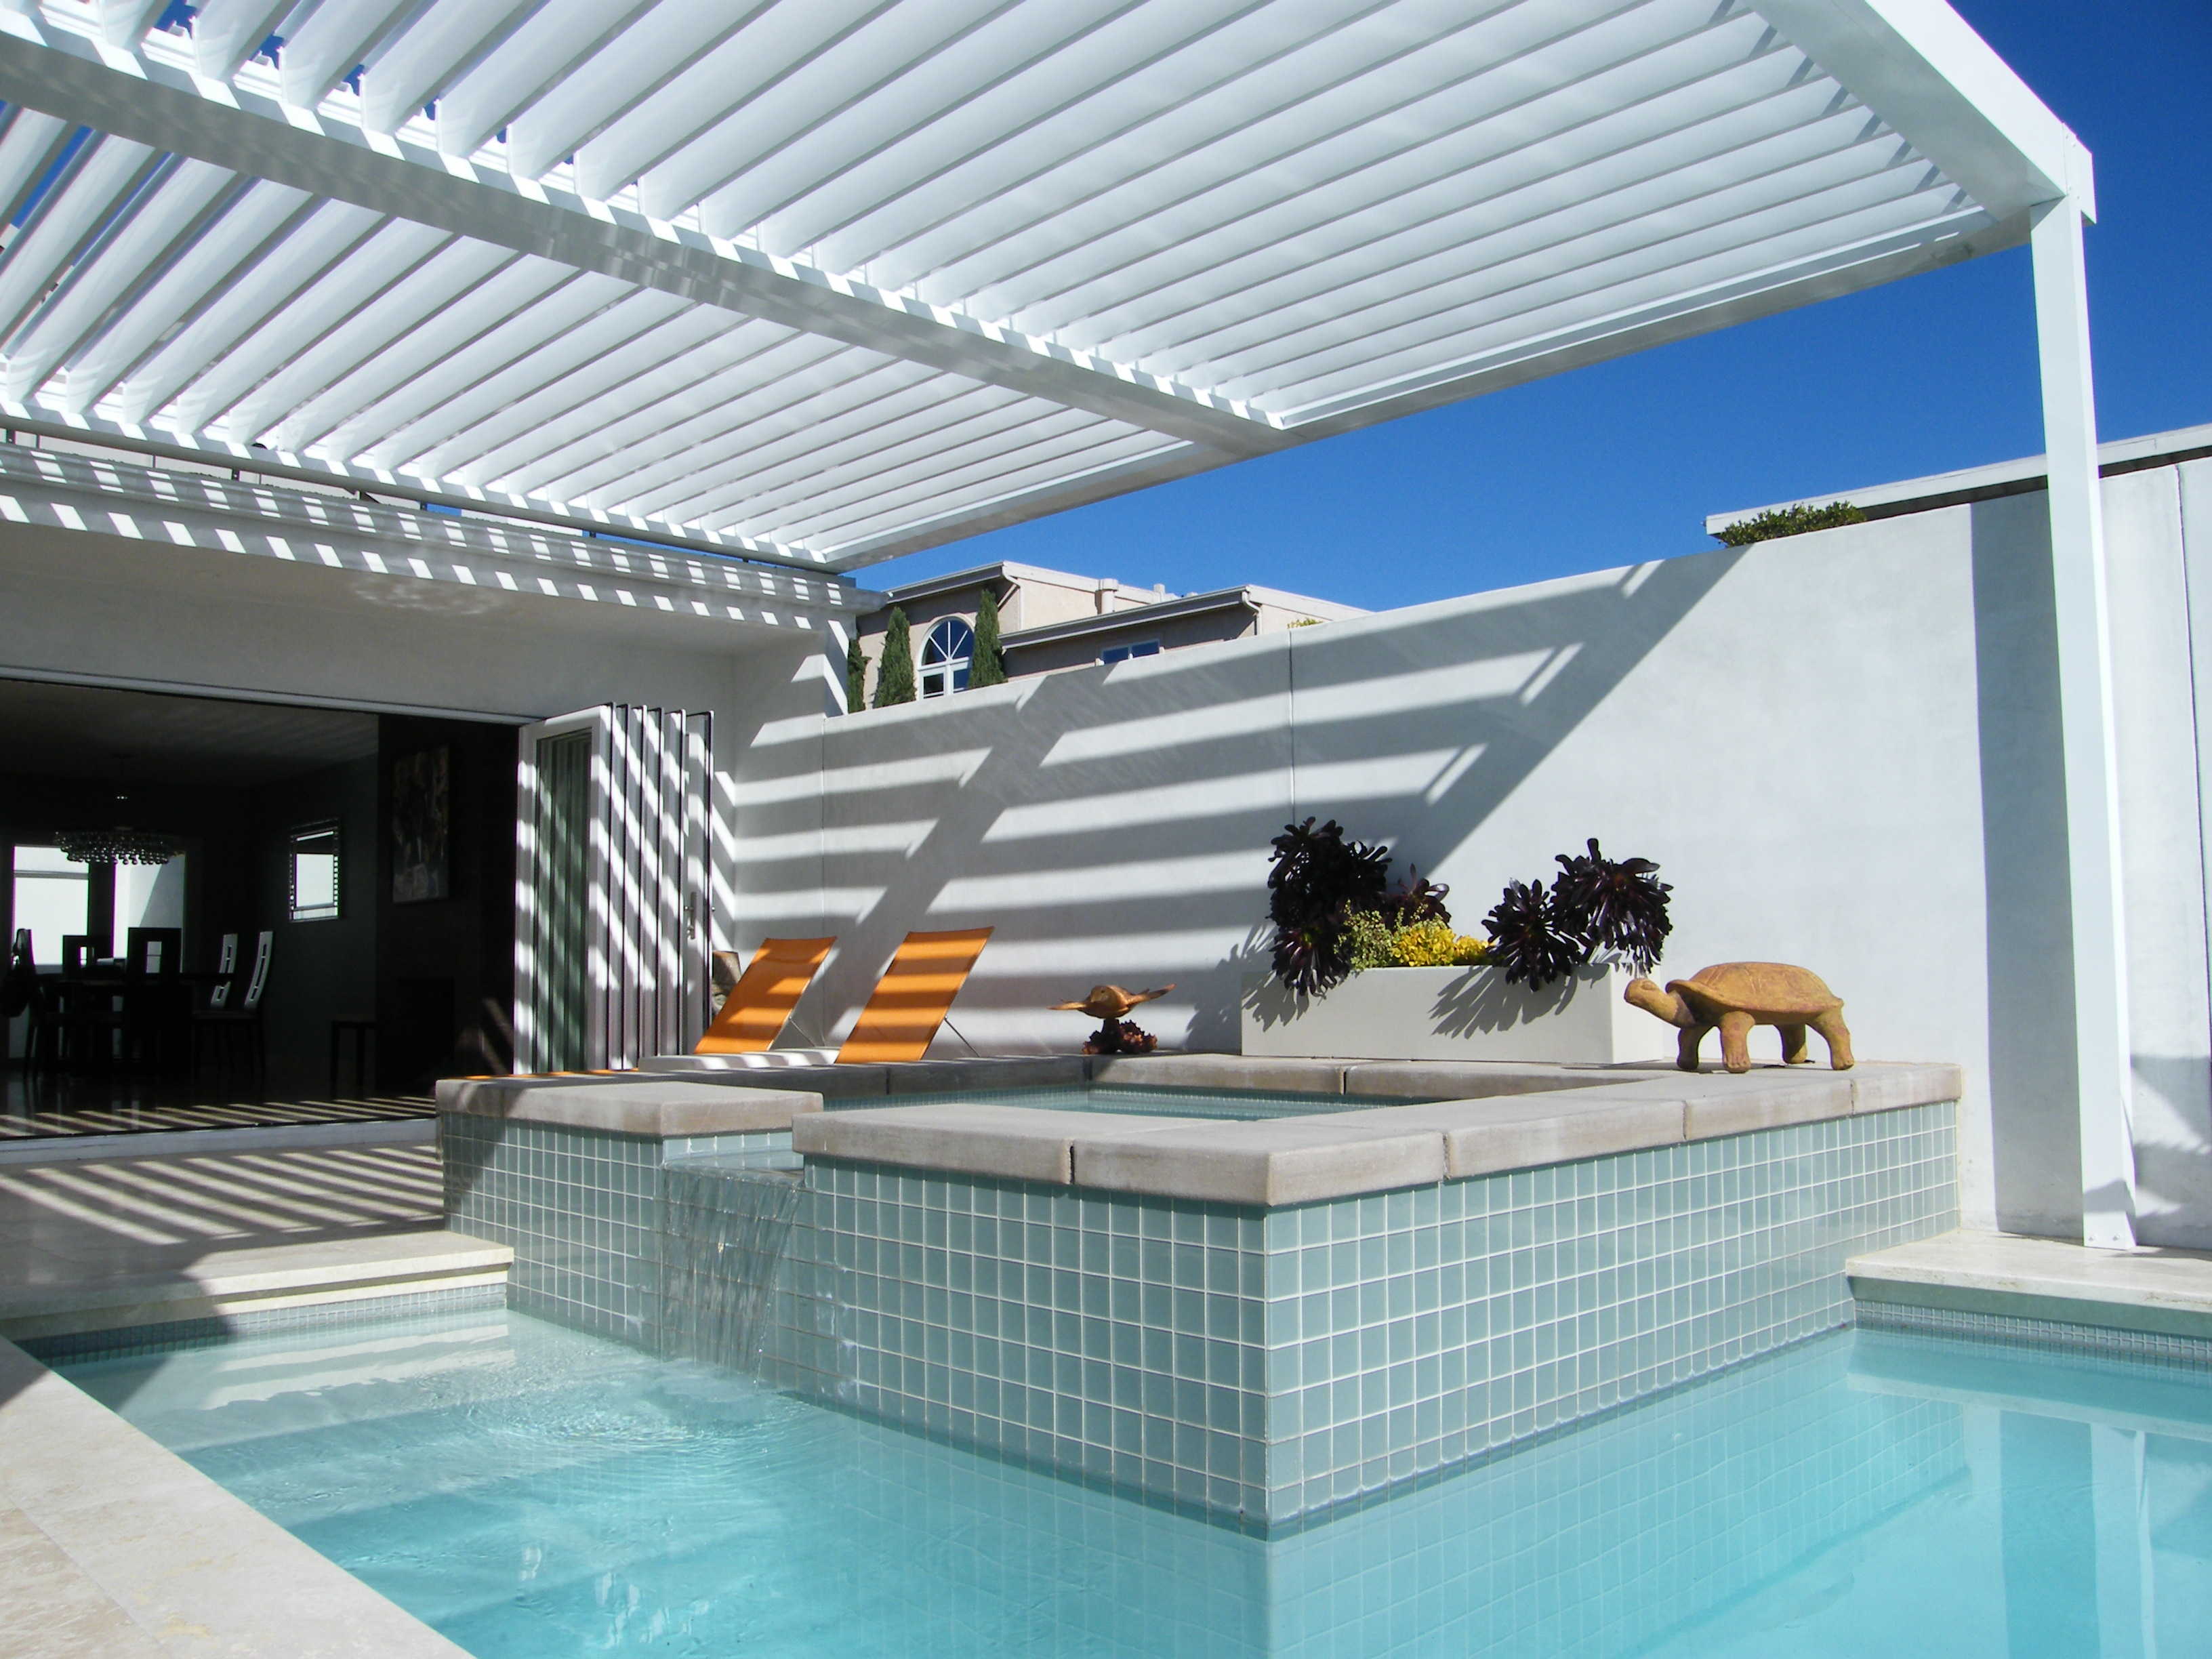 Equinox Louvered roof system patio cover